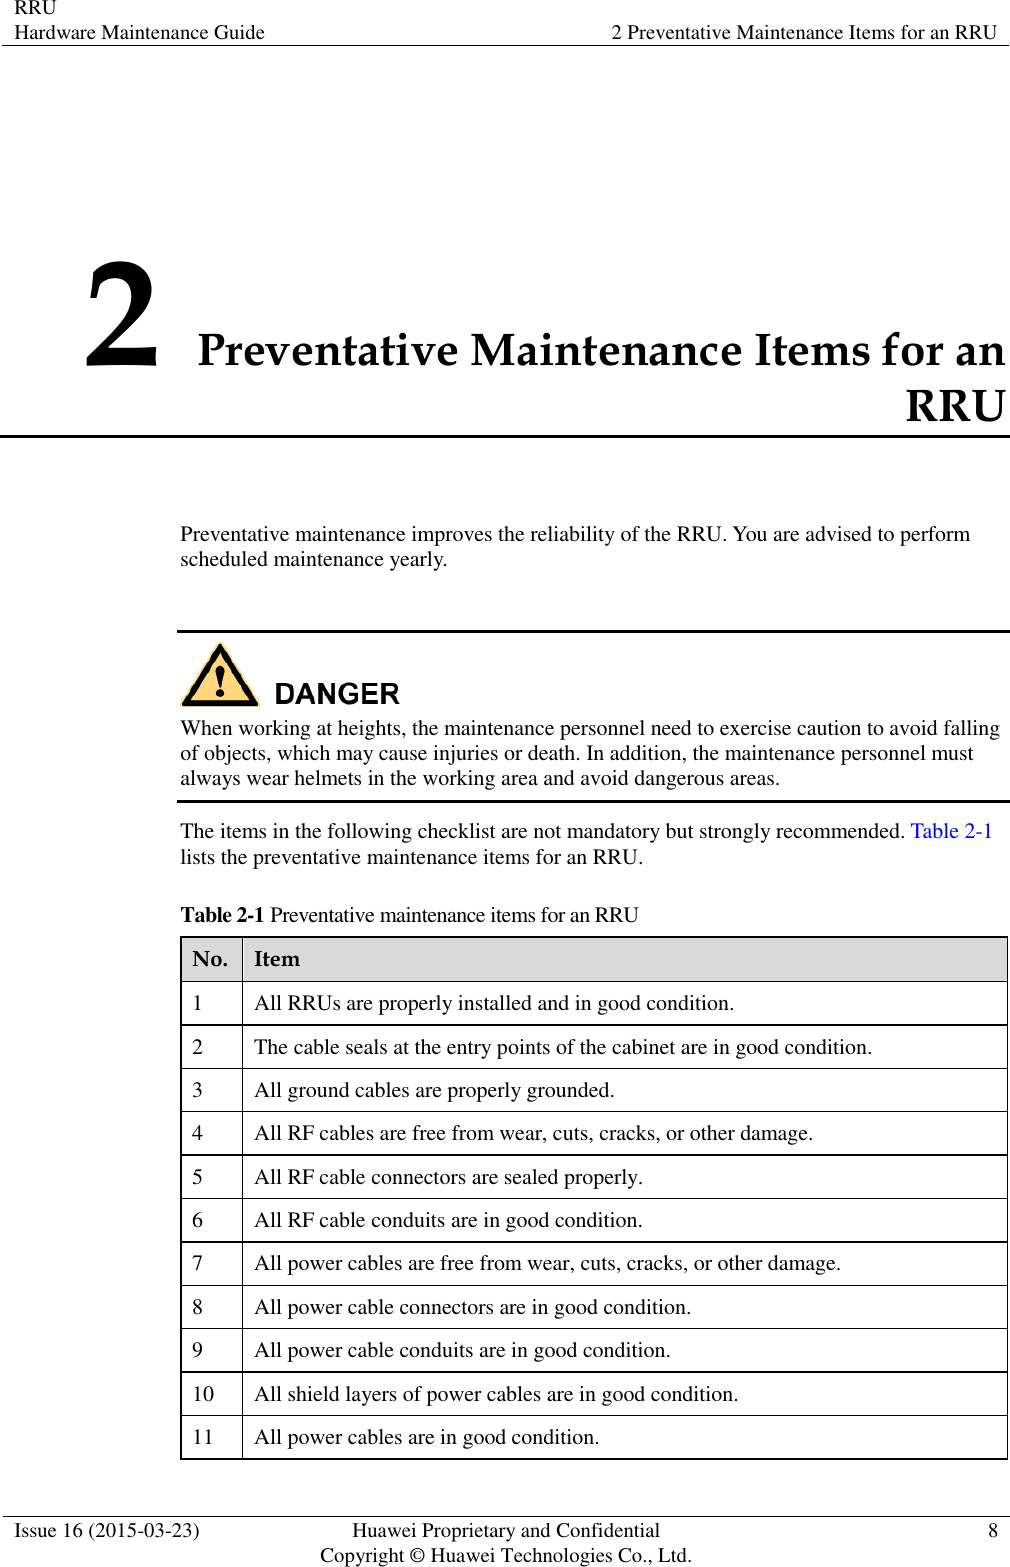 RRU Hardware Maintenance Guide 2 Preventative Maintenance Items for an RRU  Issue 16 (2015-03-23) Huawei Proprietary and Confidential                                     Copyright © Huawei Technologies Co., Ltd. 8  2 Preventative Maintenance Items for an RRU Preventative maintenance improves the reliability of the RRU. You are advised to perform scheduled maintenance yearly.   When working at heights, the maintenance personnel need to exercise caution to avoid falling of objects, which may cause injuries or death. In addition, the maintenance personnel must always wear helmets in the working area and avoid dangerous areas. The items in the following checklist are not mandatory but strongly recommended. Table 2-1 lists the preventative maintenance items for an RRU. Table 2-1 Preventative maintenance items for an RRU No. Item 1 All RRUs are properly installed and in good condition. 2 The cable seals at the entry points of the cabinet are in good condition. 3 All ground cables are properly grounded. 4 All RF cables are free from wear, cuts, cracks, or other damage. 5 All RF cable connectors are sealed properly. 6 All RF cable conduits are in good condition. 7 All power cables are free from wear, cuts, cracks, or other damage. 8 All power cable connectors are in good condition. 9 All power cable conduits are in good condition. 10 All shield layers of power cables are in good condition. 11 All power cables are in good condition. 